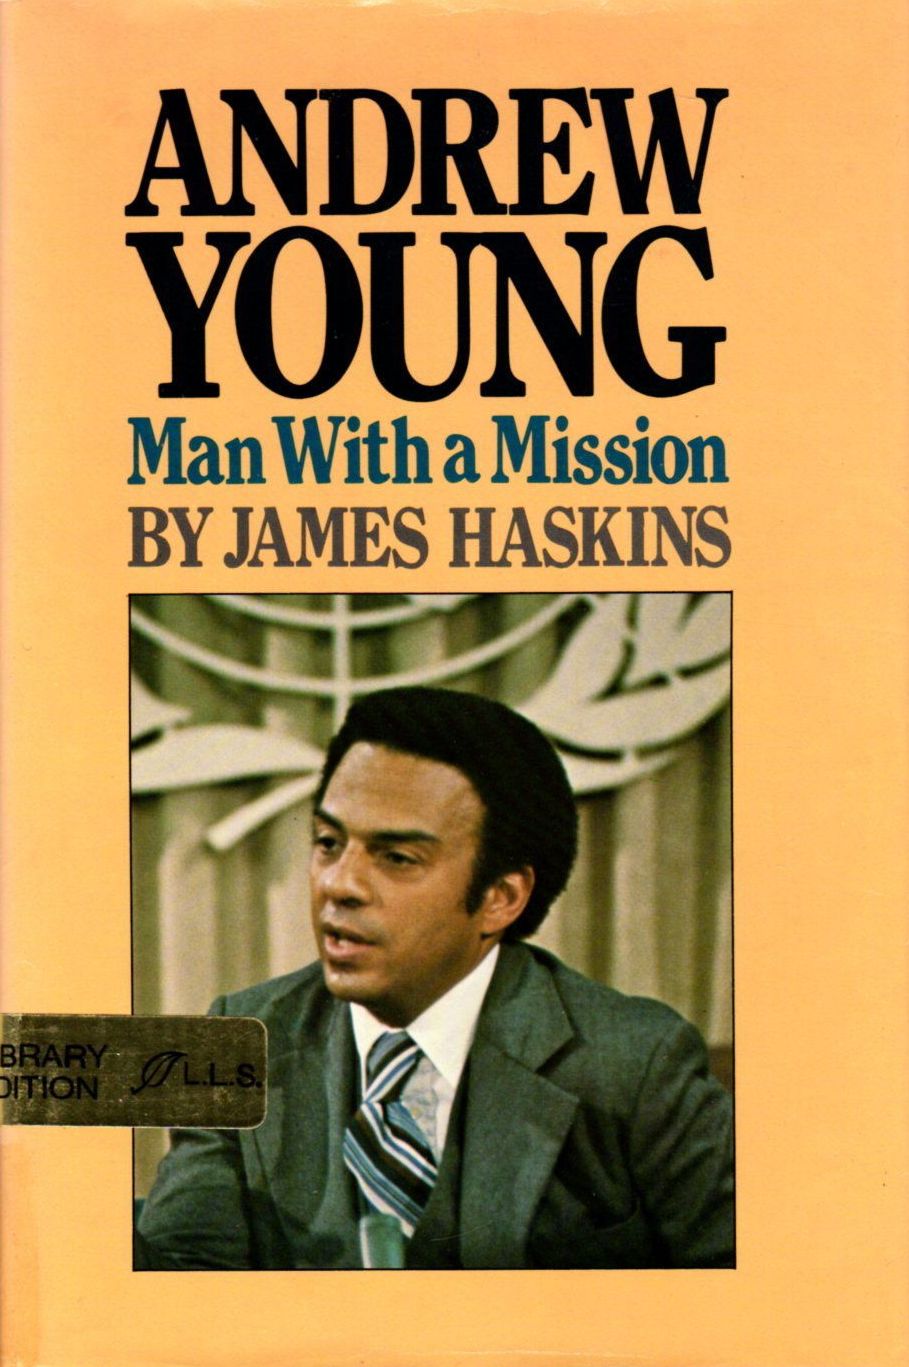 Click for a larger image of Andrew Young, Man With a Mission